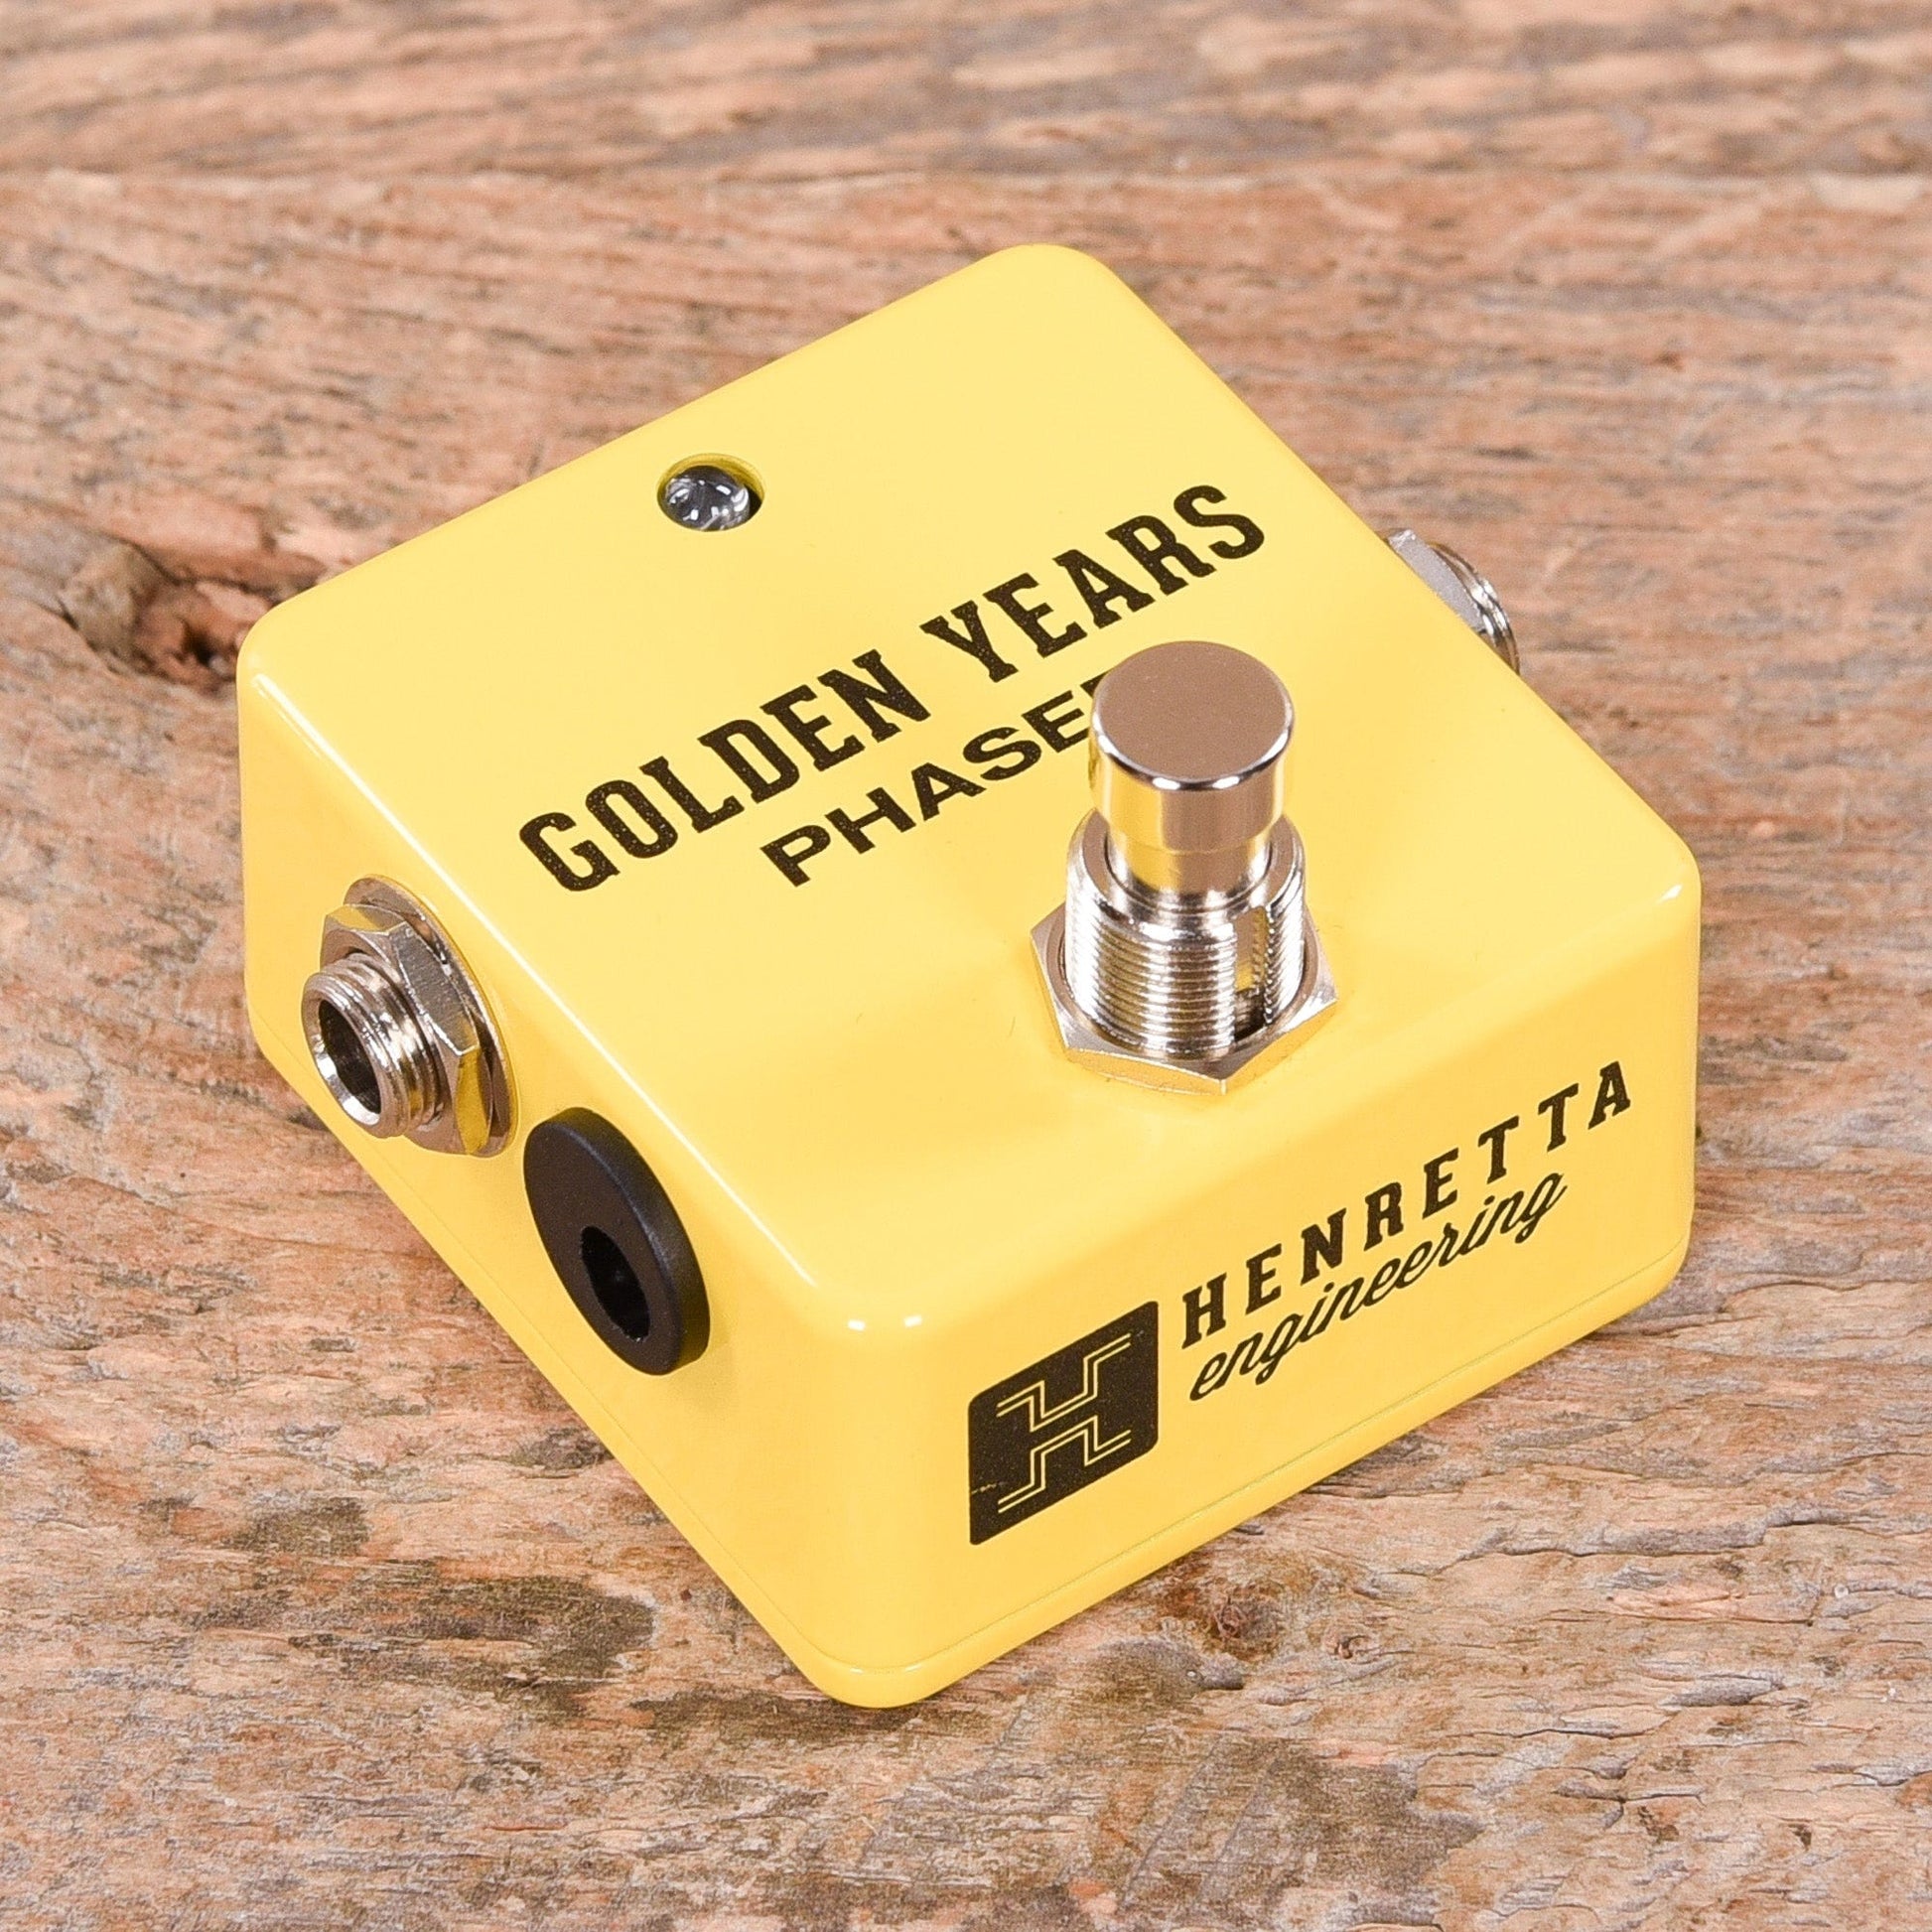 Henretta Engineering Golden Years Phaser Effects and Pedals / Phase Shifters